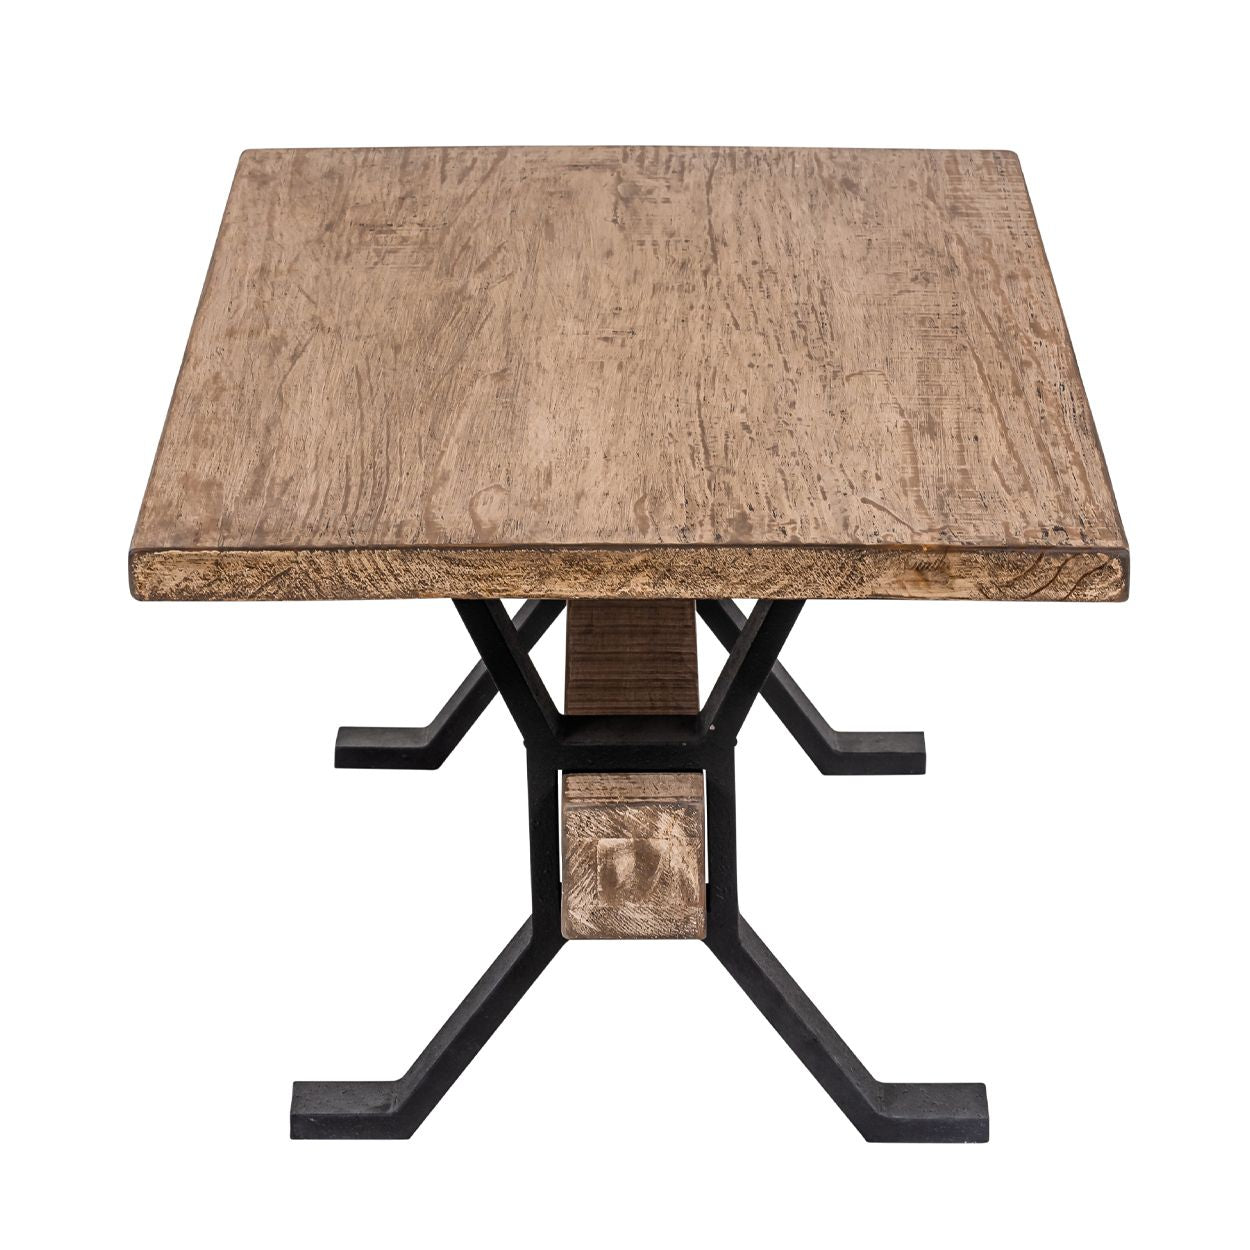 Kingswood Dining Table - Standard